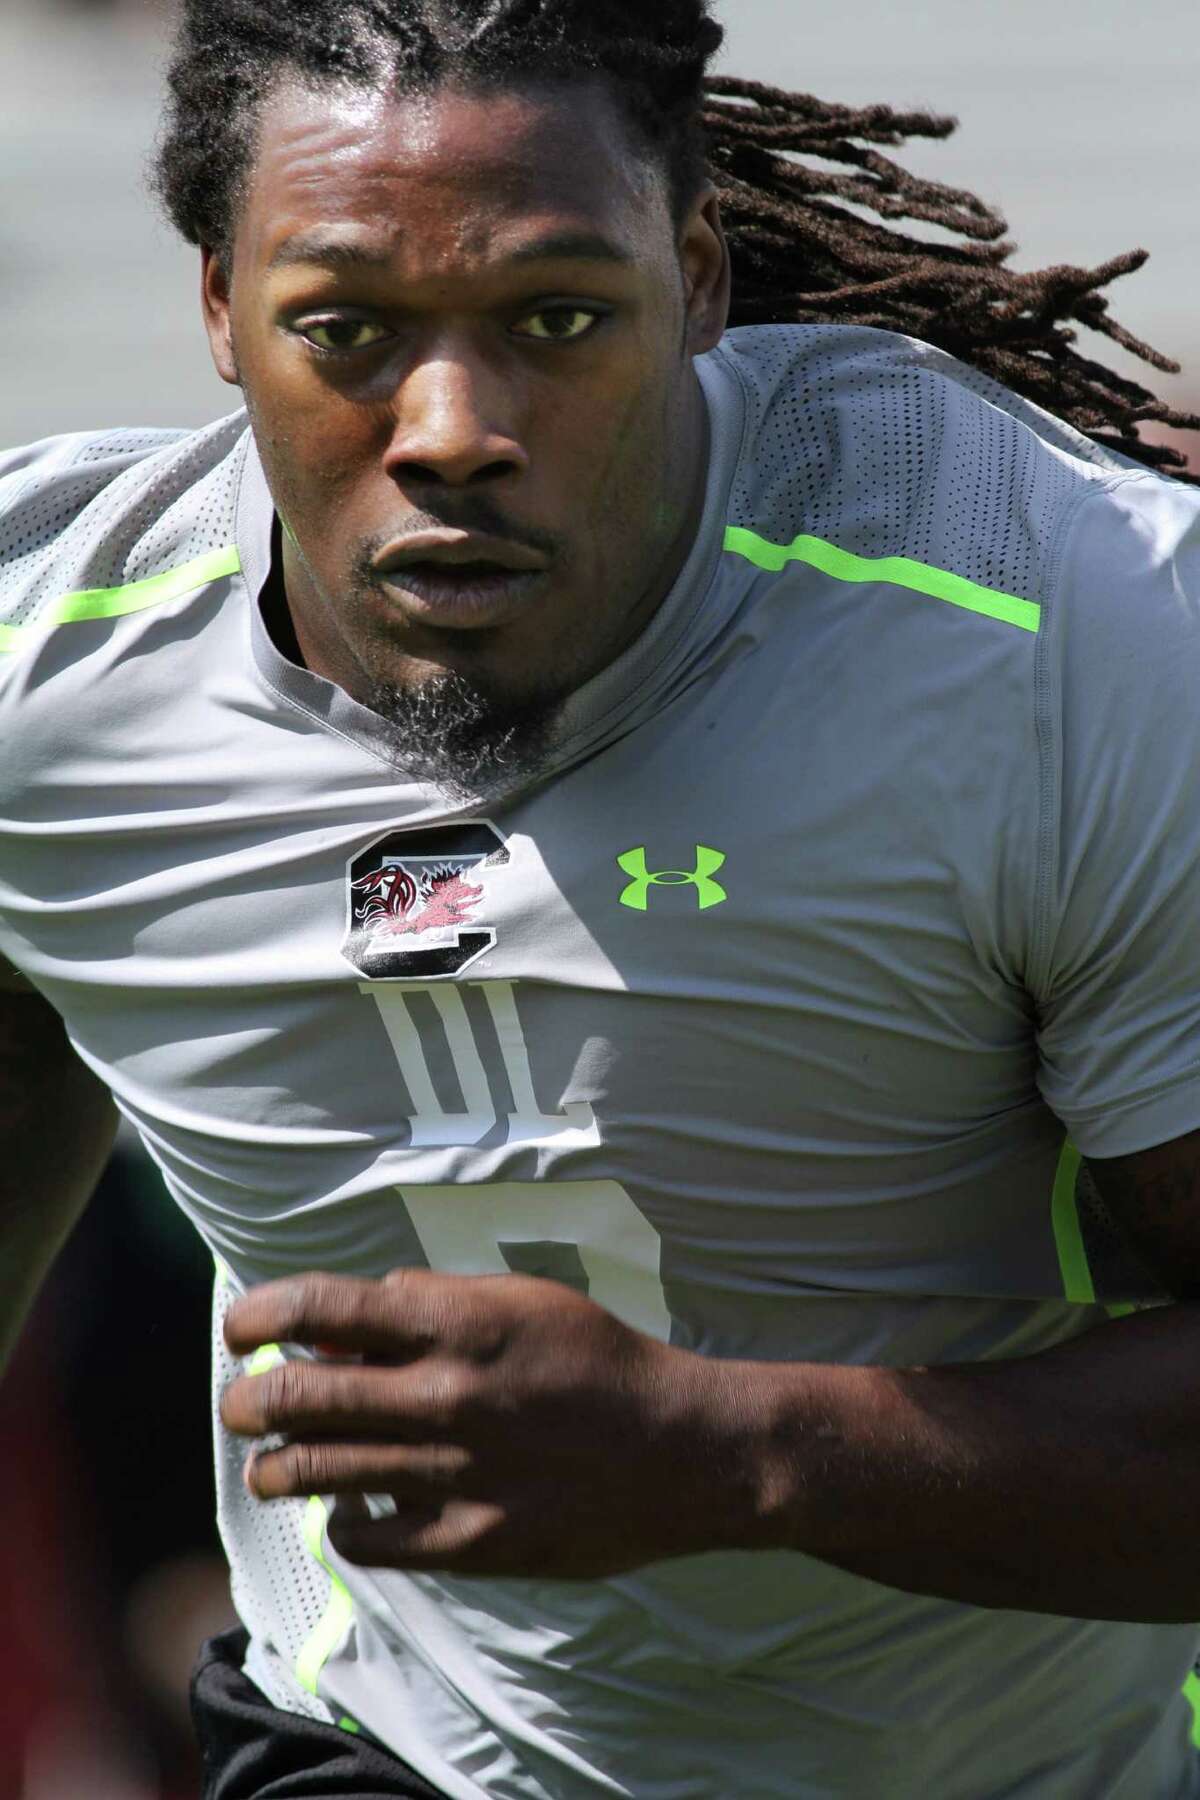 Defensive end Jadeveon Clowney will face sky-high expectations as a top pick.